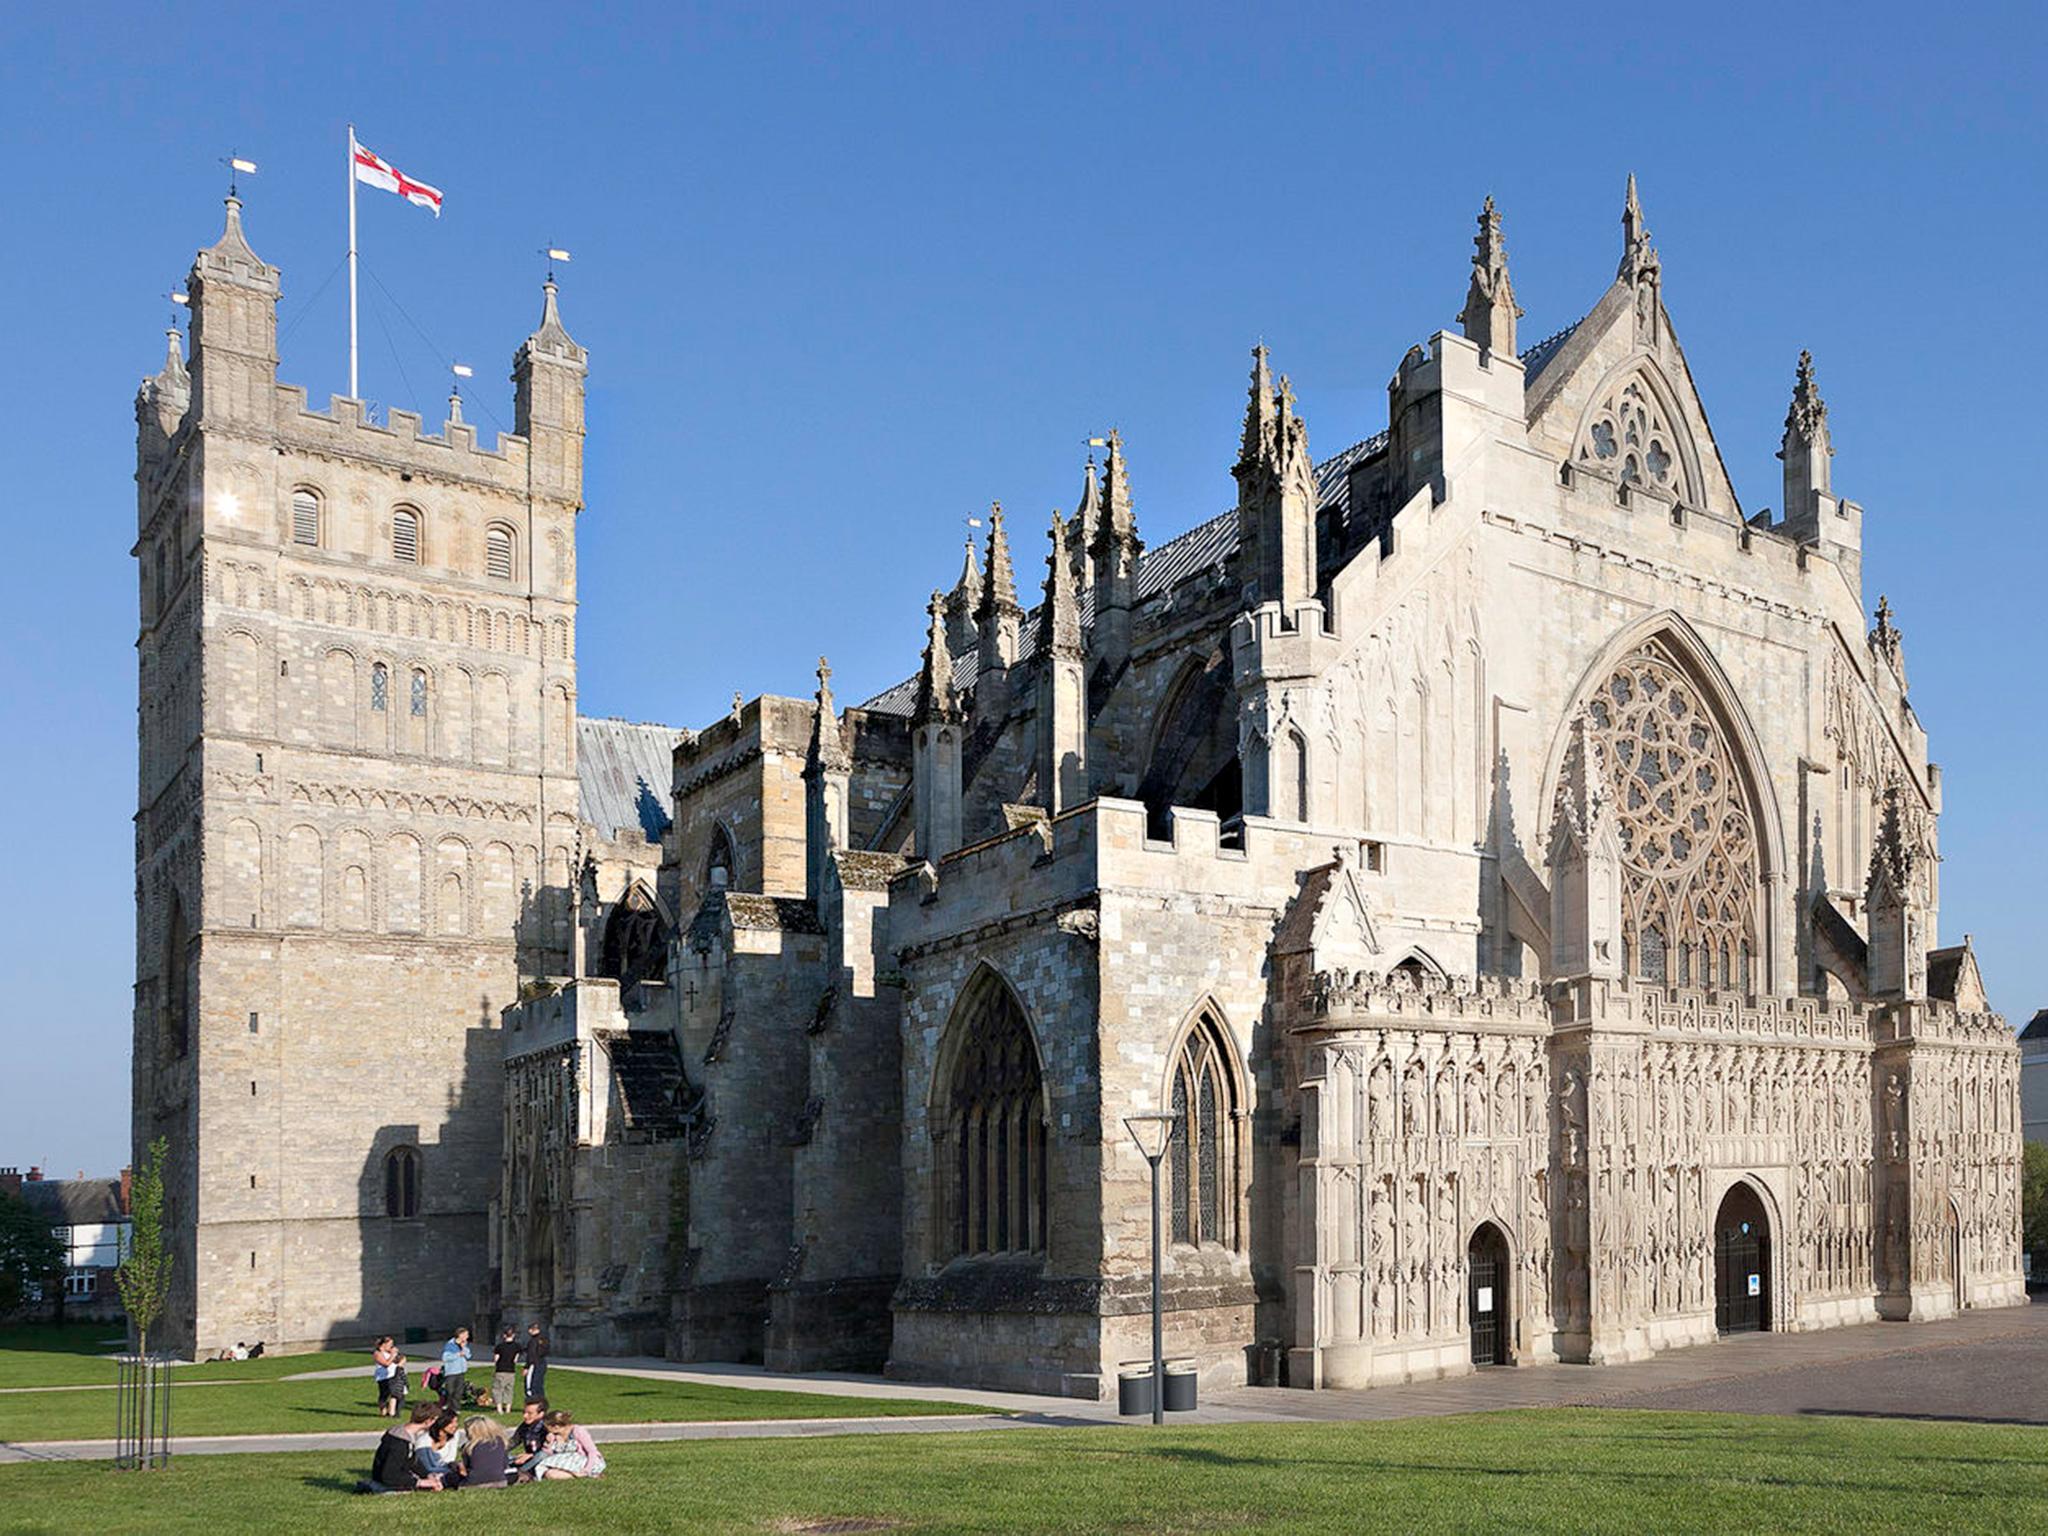 The visit, part of the religious education curriculum, will include Exeter Cathedral across the county border in Devon